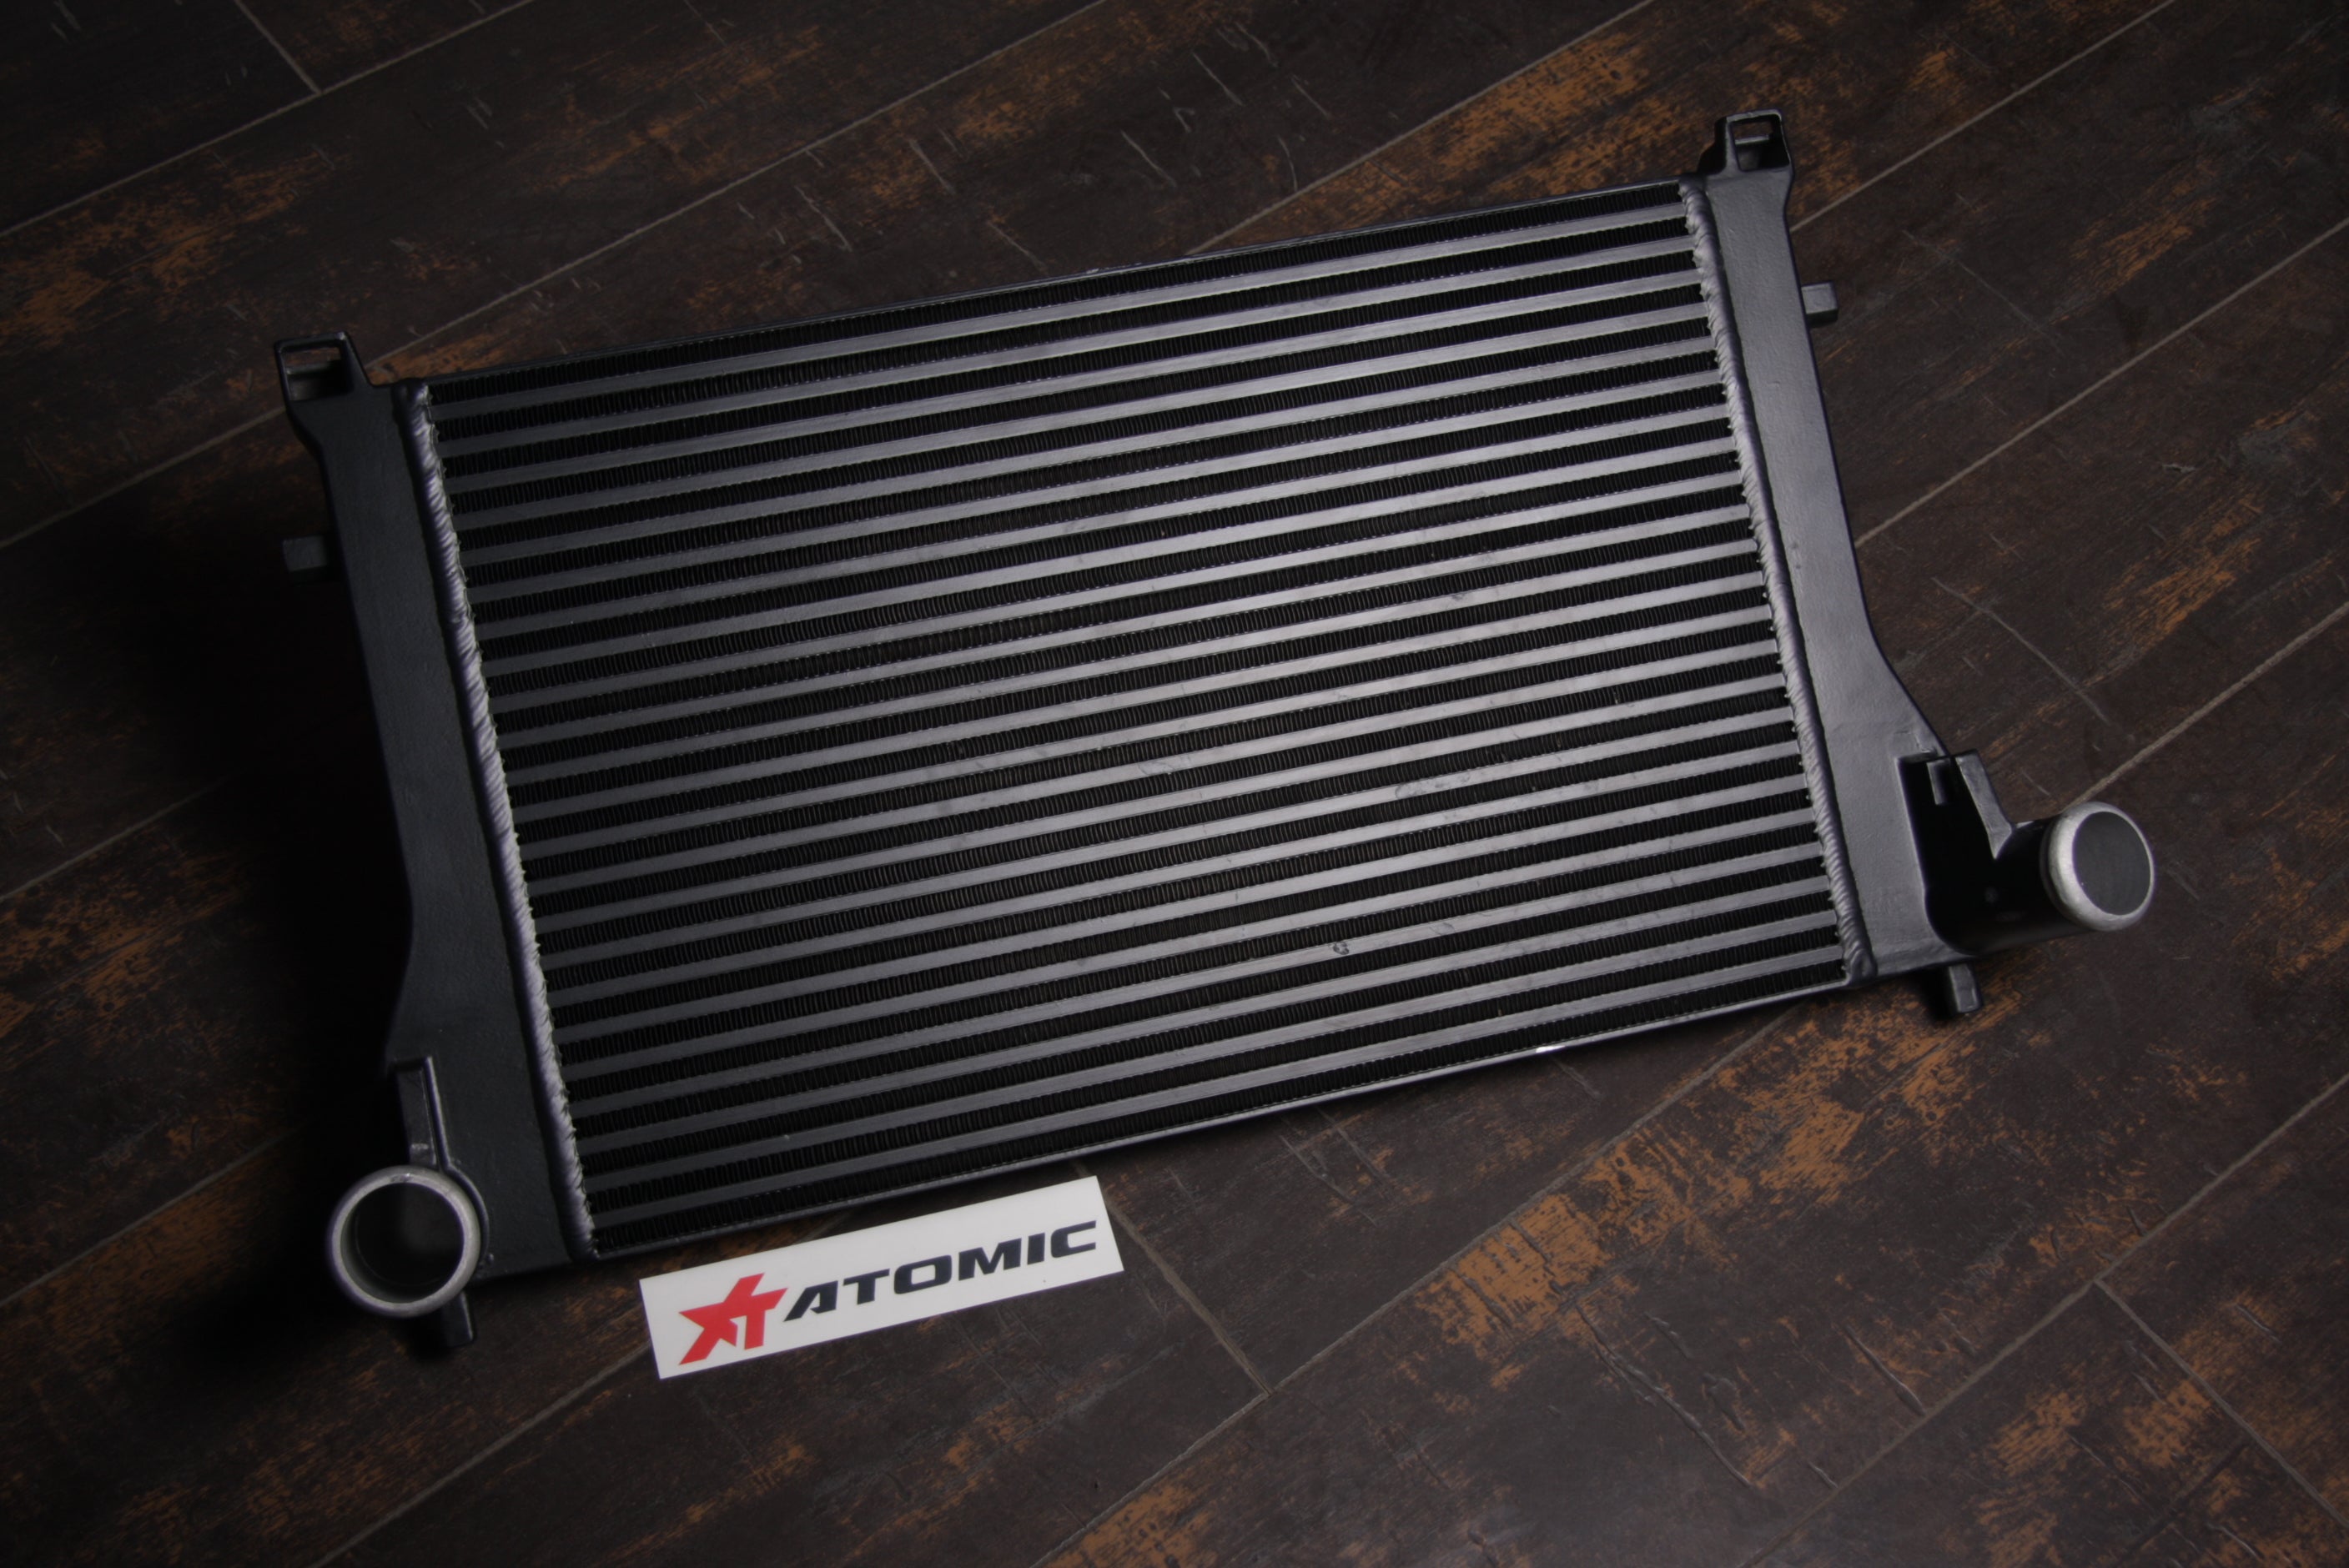 ARD 160002 Intercooler kit with piping for VW Golf 7 GTI, Golf 7 R, AUDI S3 (8V) Core size: 630*410*50 mm Photo-3 